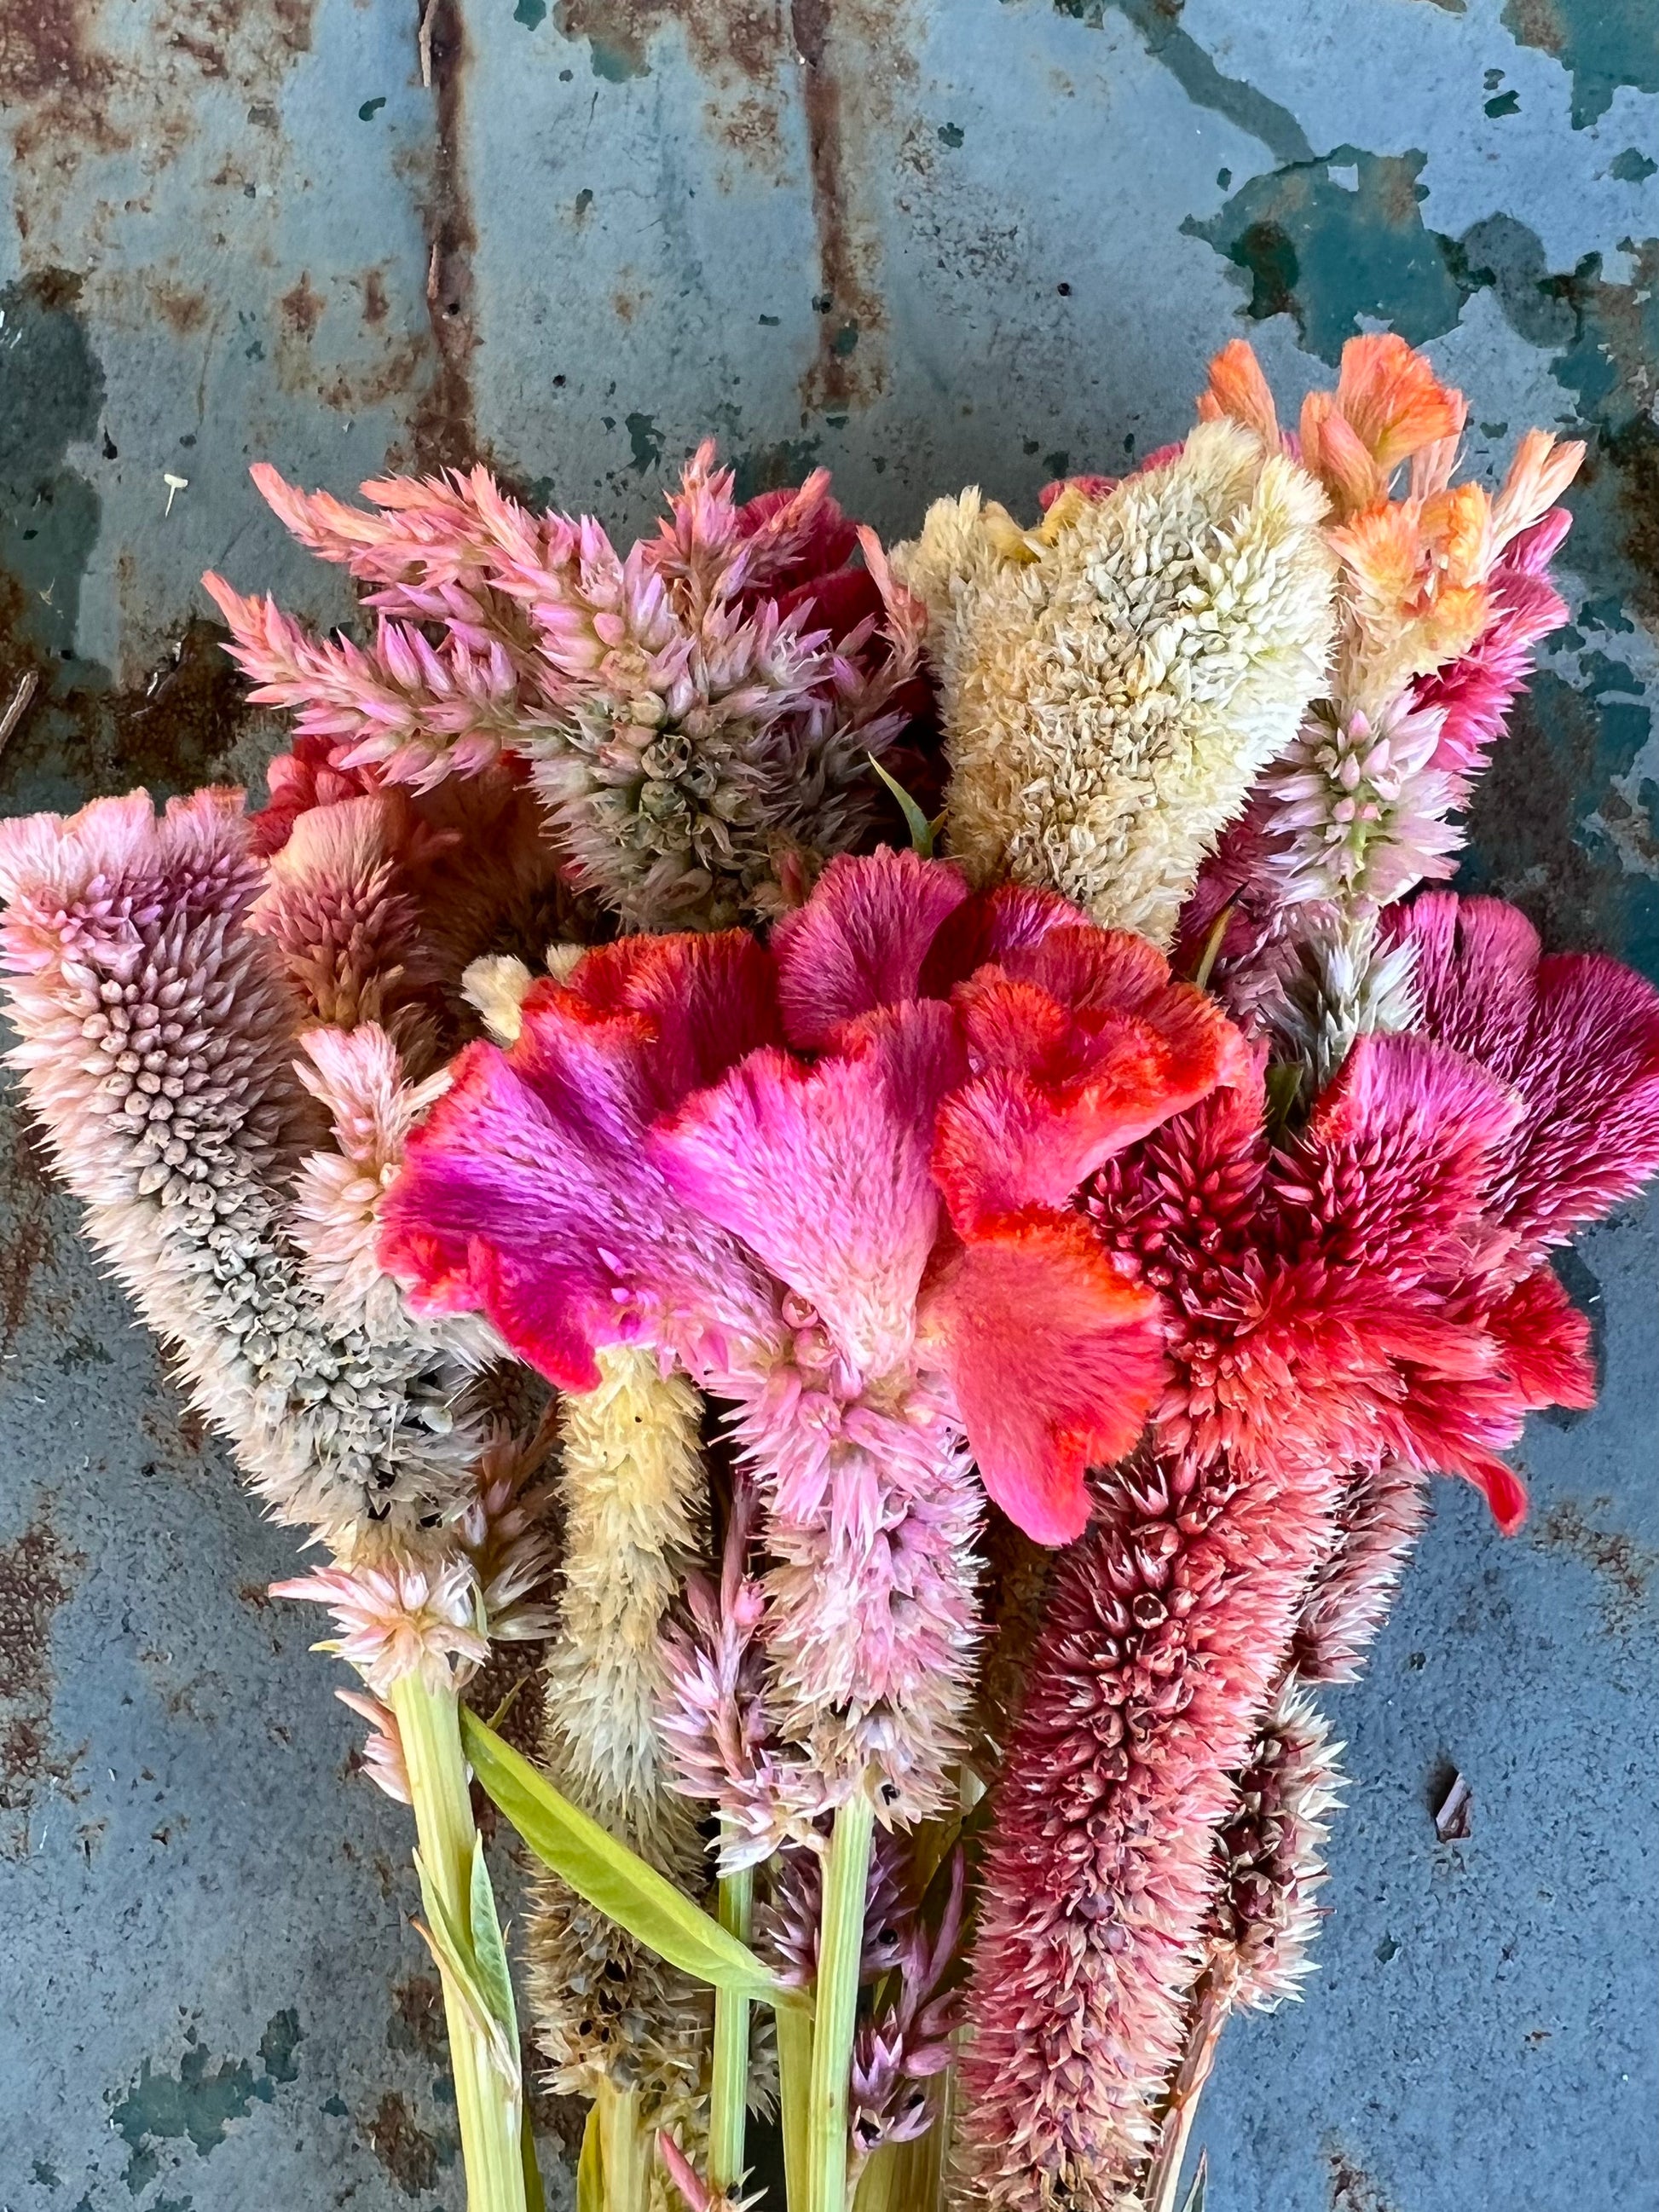 A mix of brightly colored celosia blooms. Mix of colors and shapes of celosia